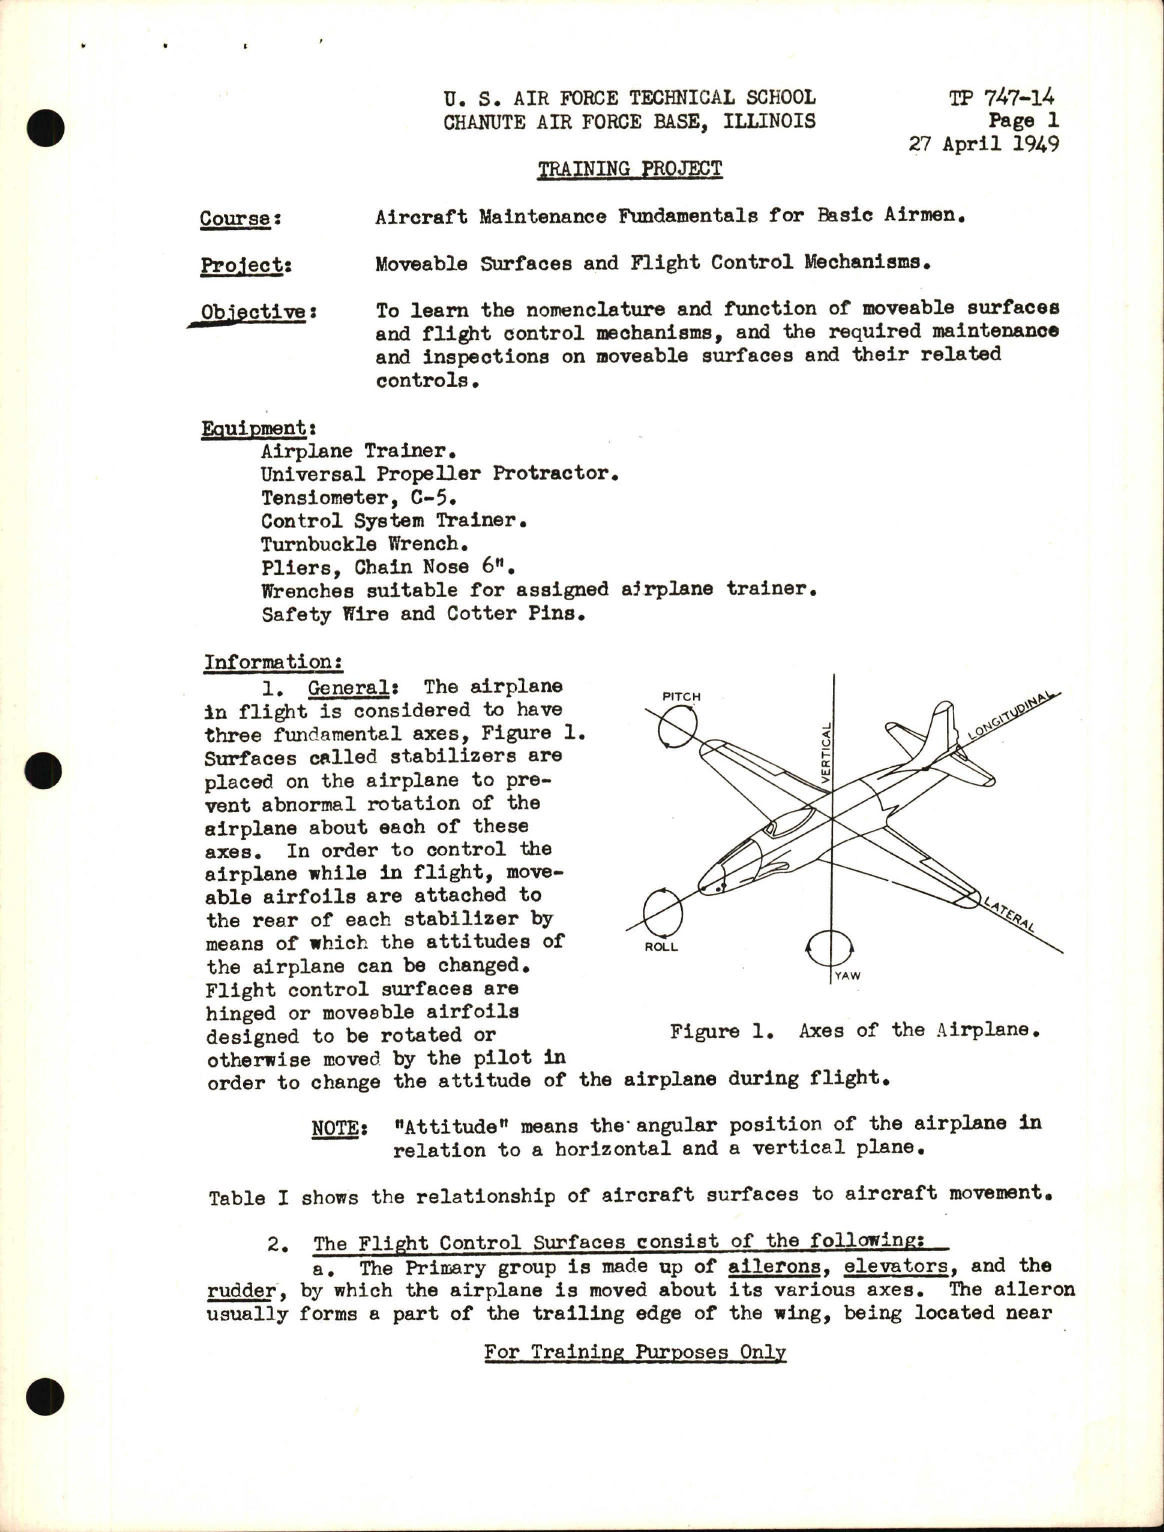 Sample page 1 from AirCorps Library document: Training Project, Moveable Surfaces and Flight Control Mechanisms